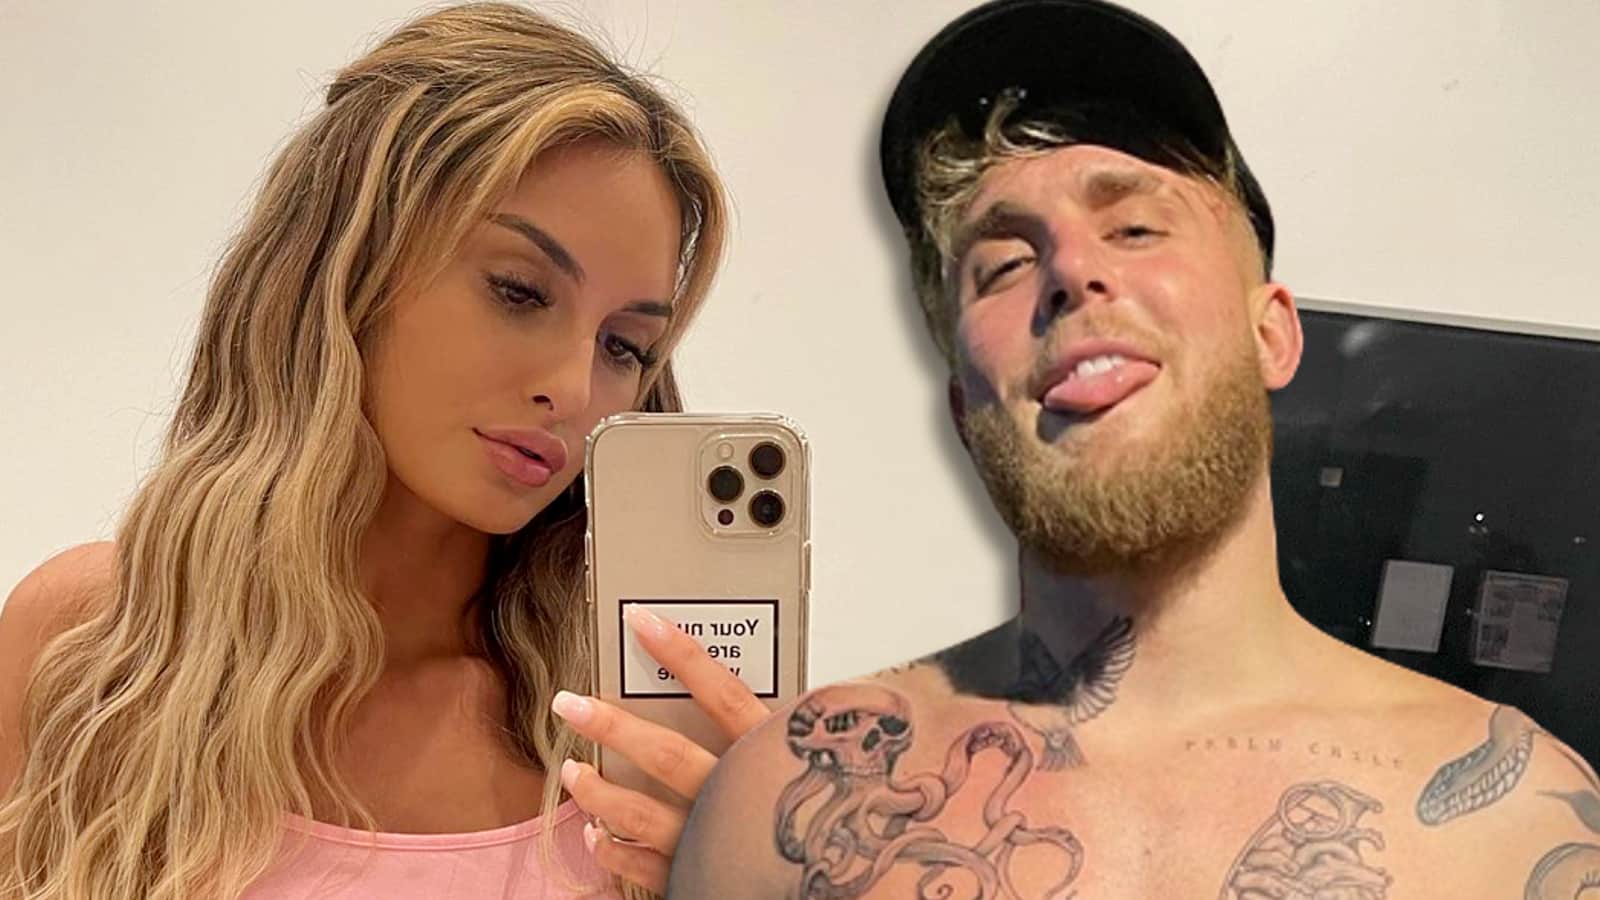 Y'all Sick Couple': Jake Paul & Julia Rose's Actions With $16,000 Louis  Vuitton Shoe Leaves Co-host Disgusted - EssentiallySports